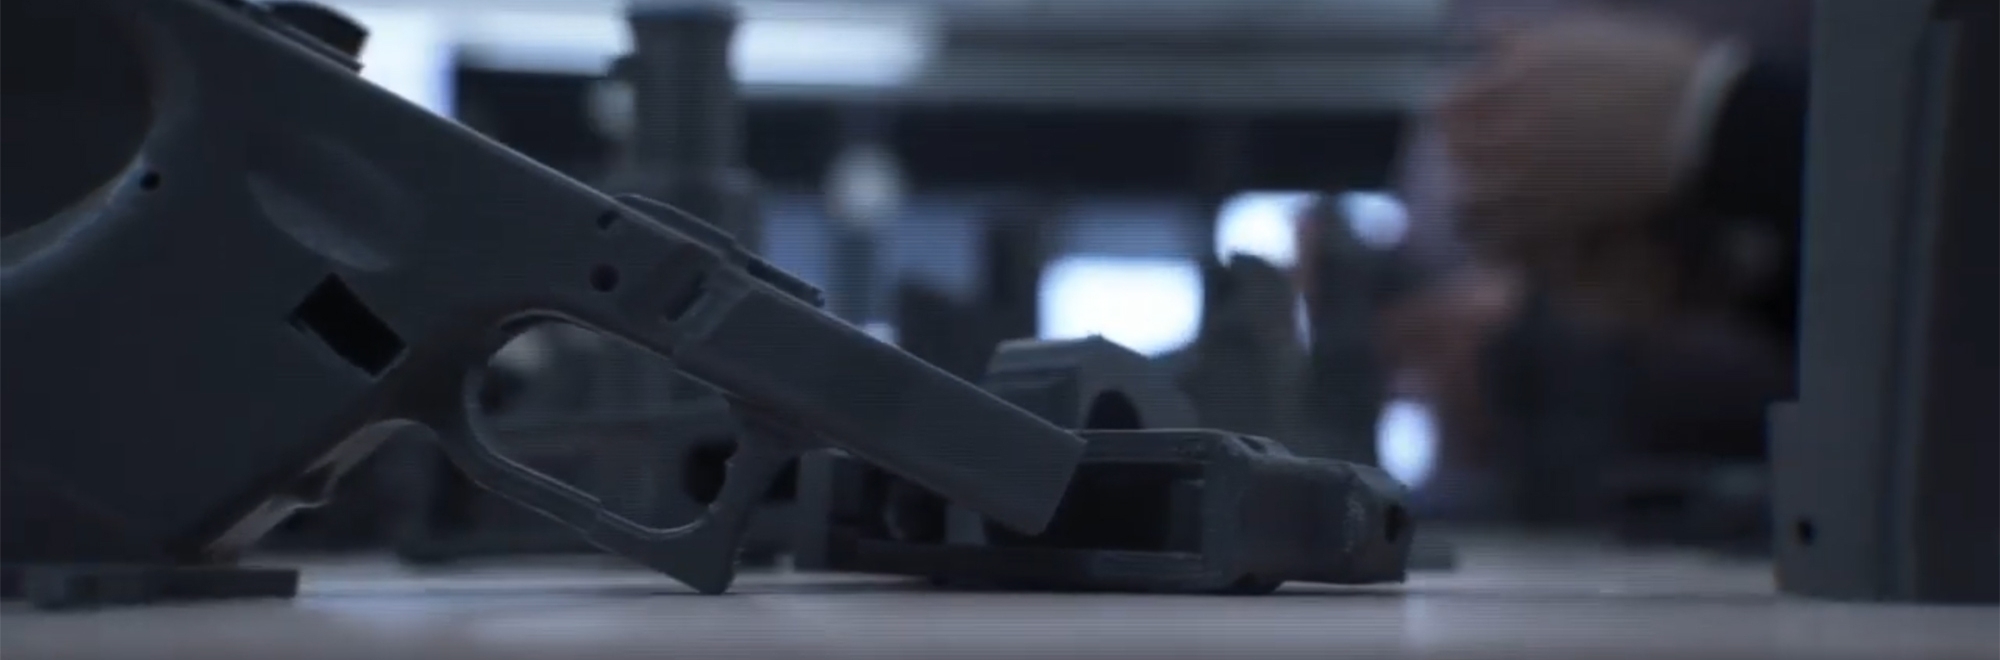 How 3D printing company Dagoma distributed misinformation so that 3D printers printed faulty guns